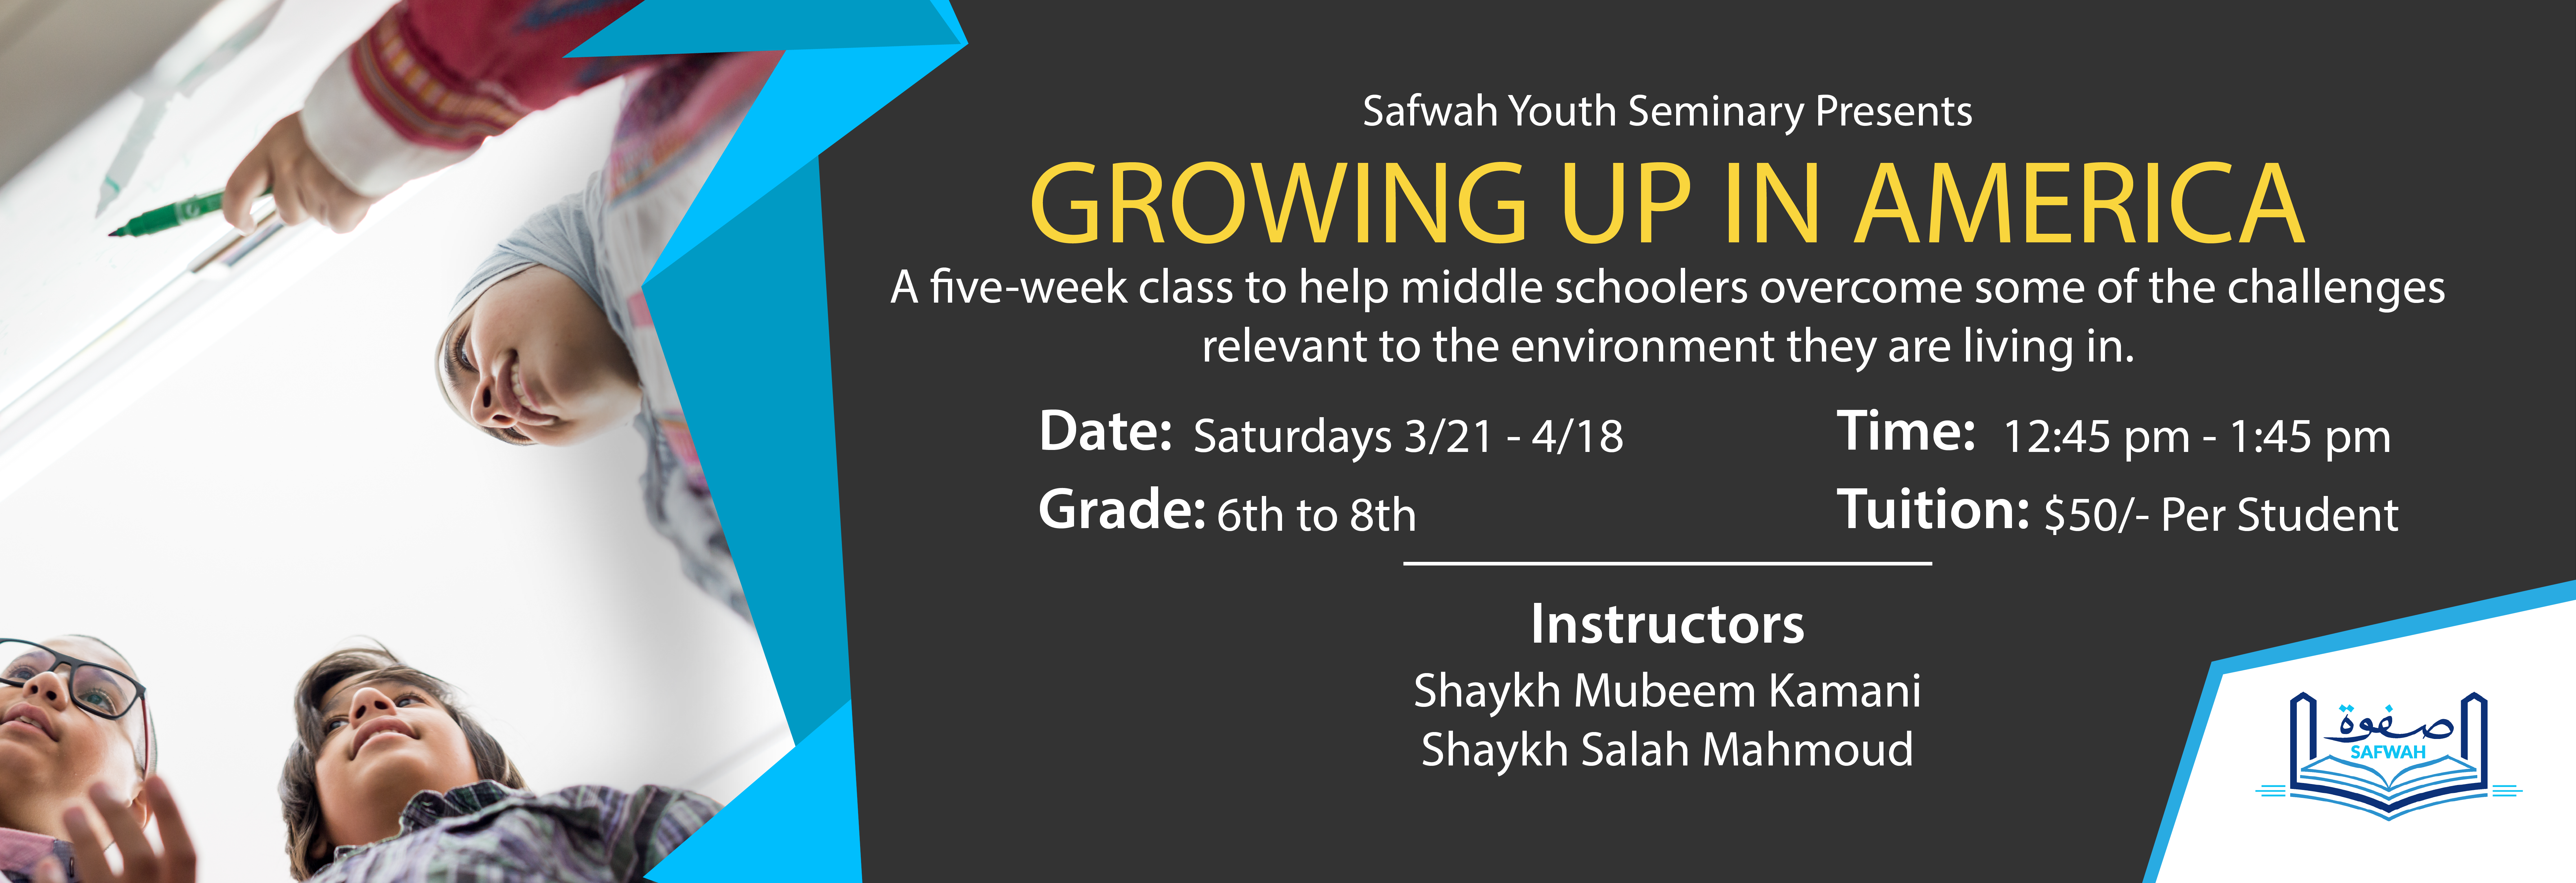 safwah middle